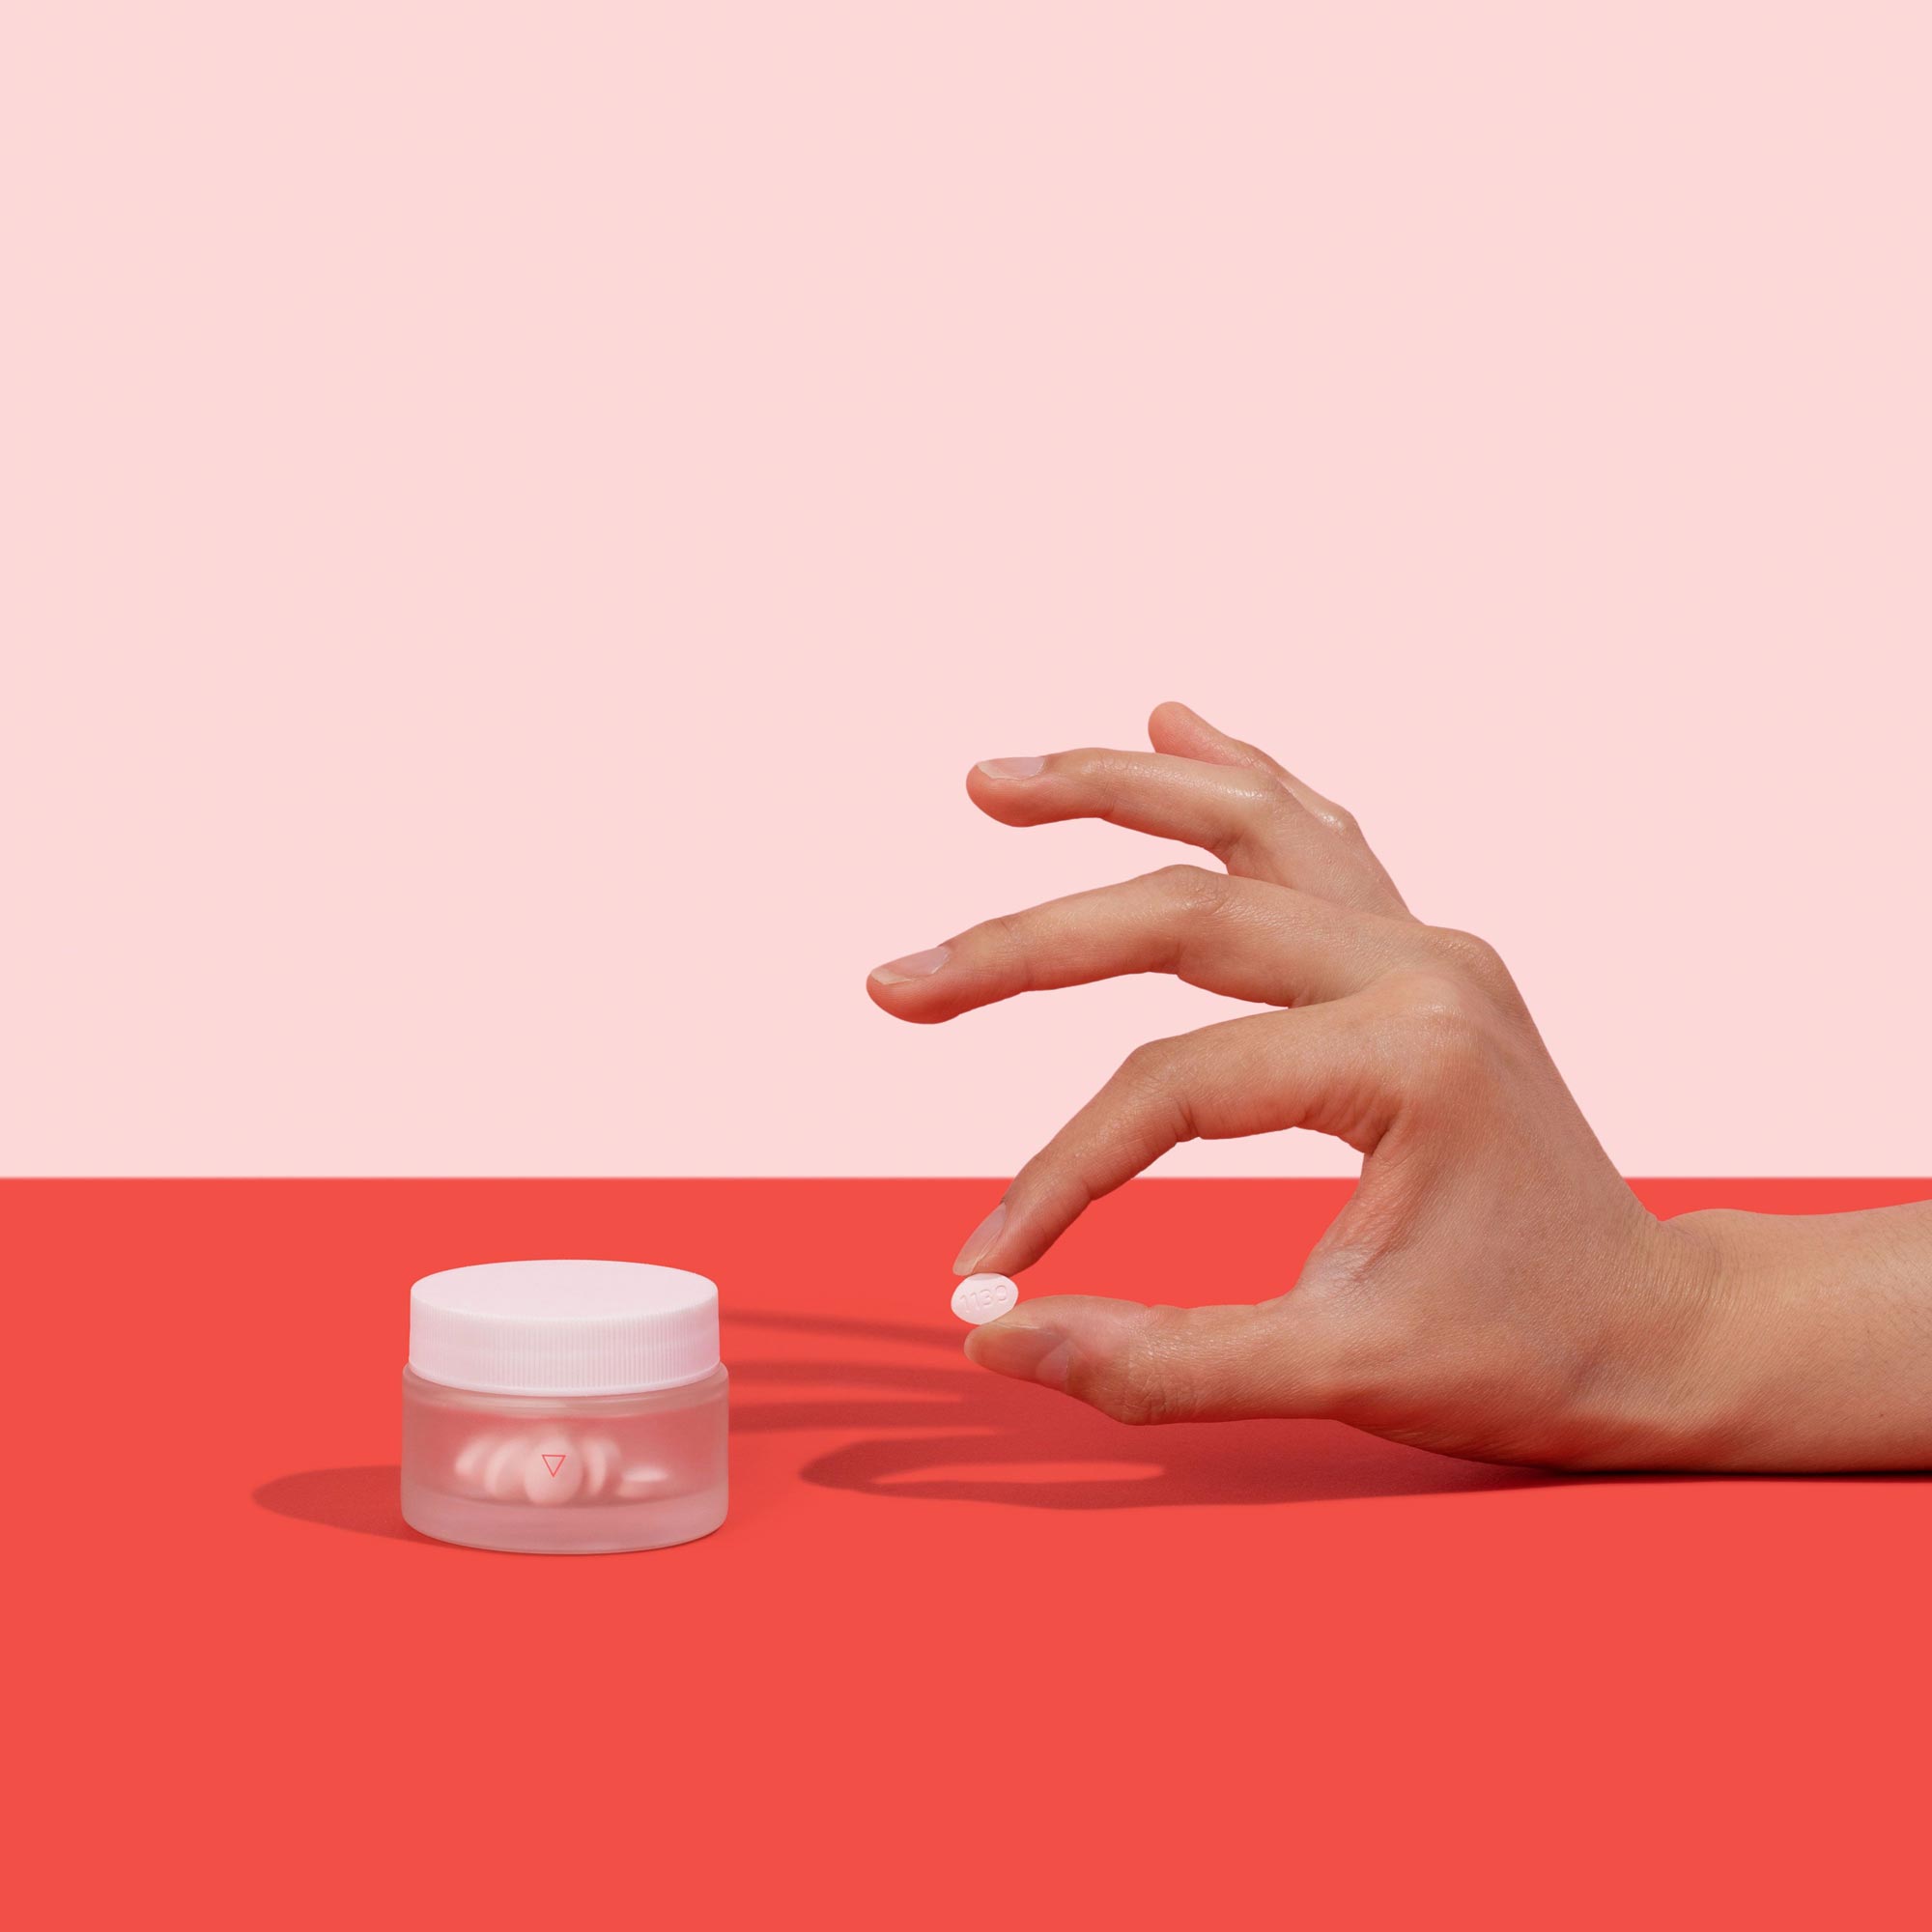 Woman's hand holding pill to treat yeast infections next to jar of antifungals on a red surface, on a pink background